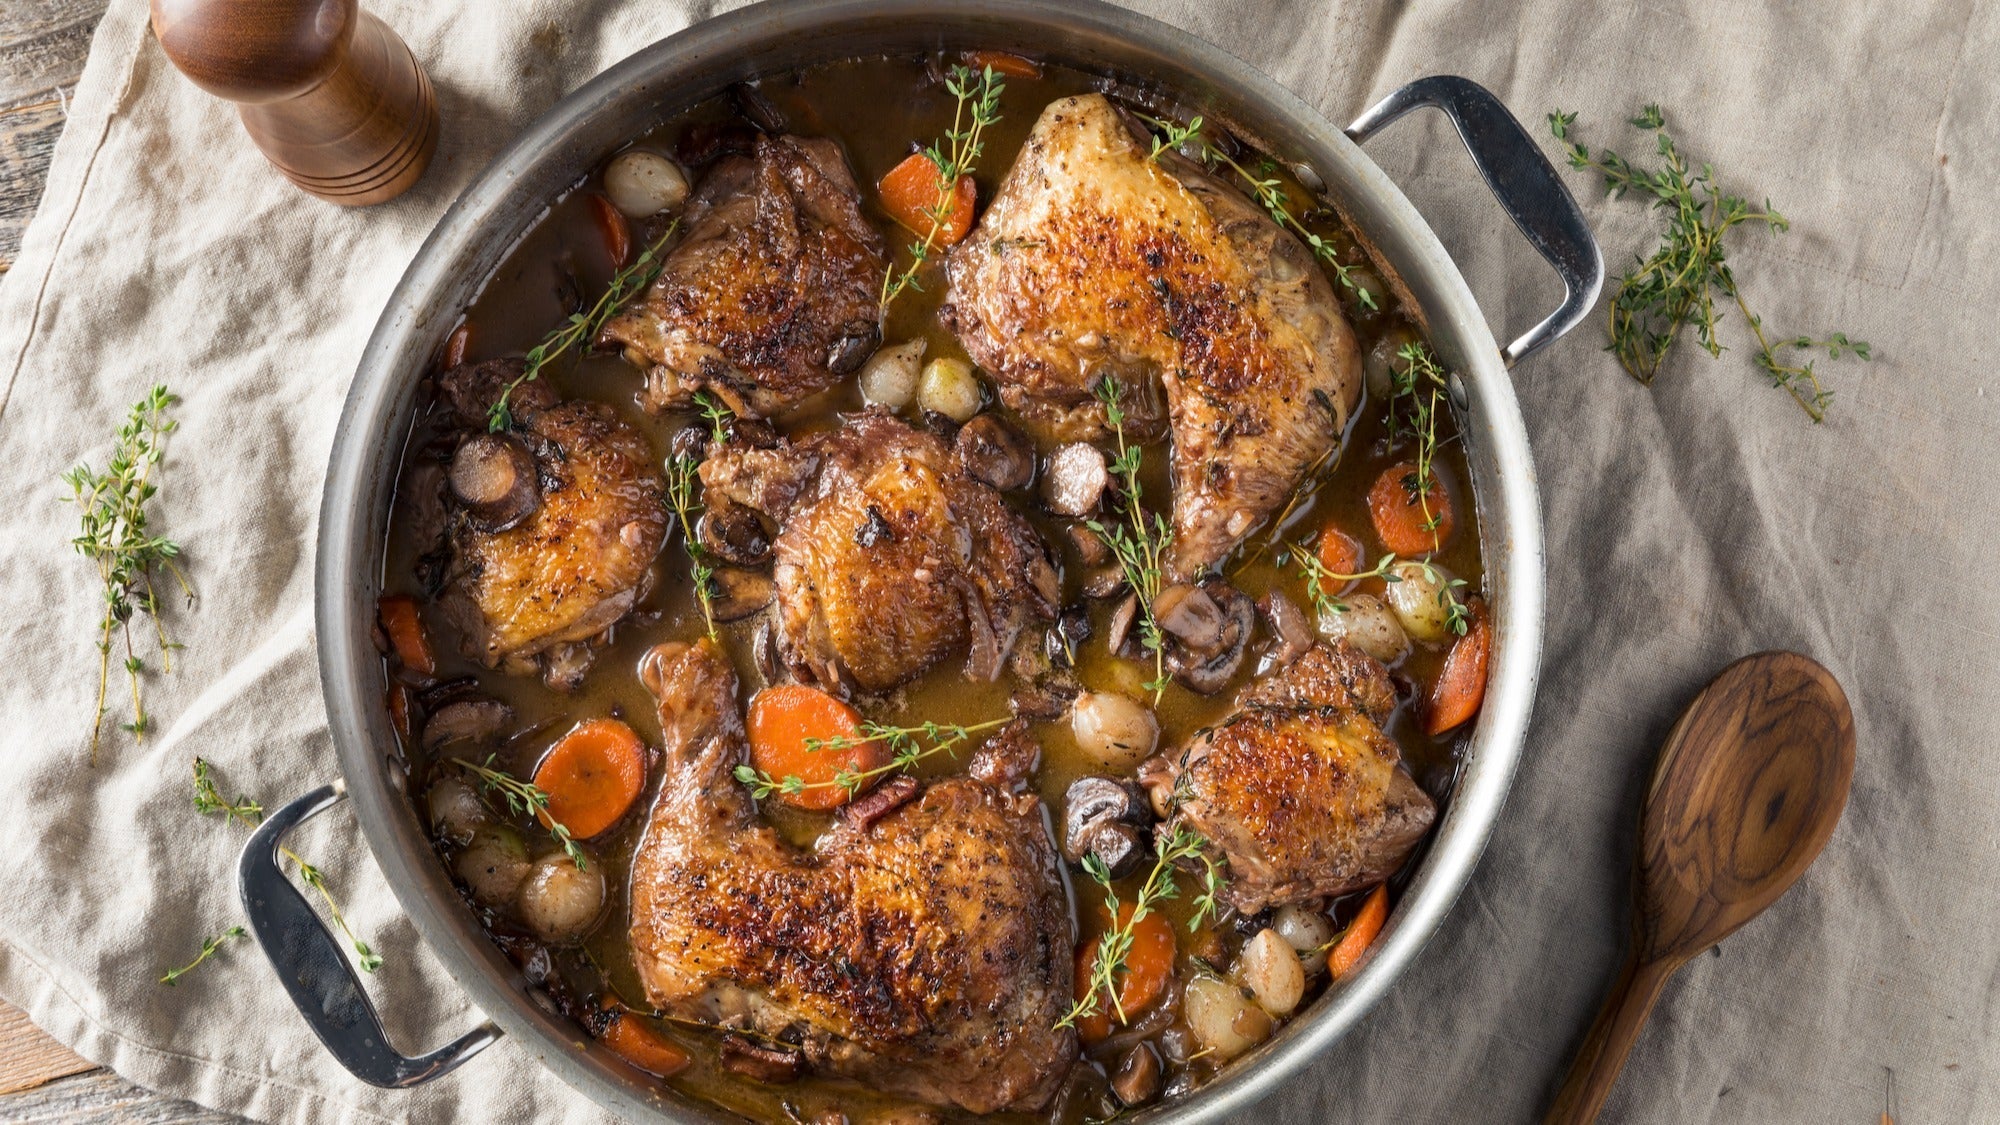 Coq Au Vin with brandy and red wine